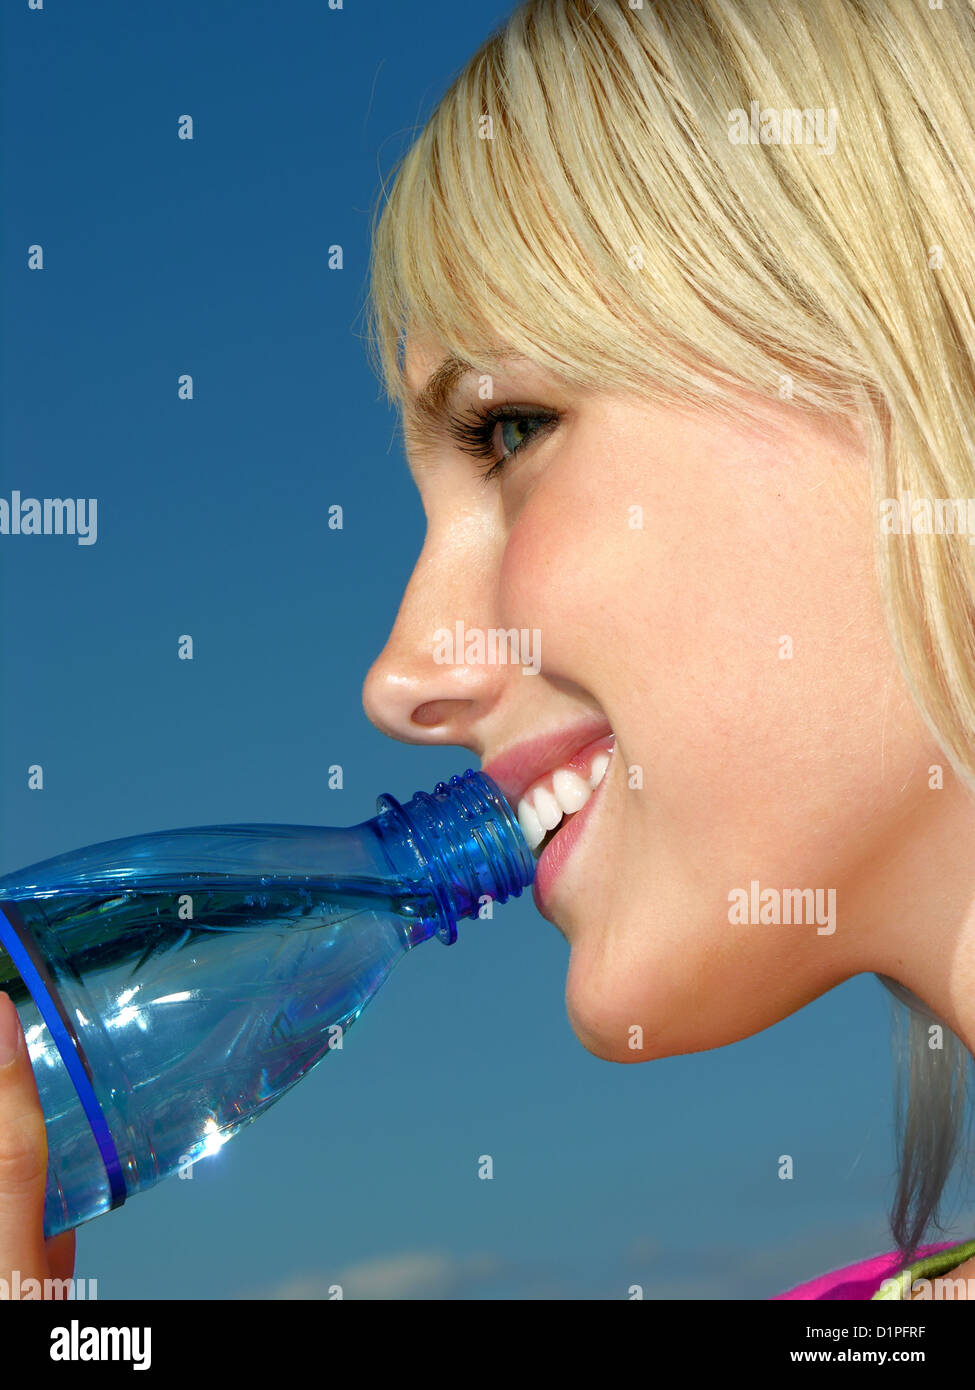 https://c8.alamy.com/comp/D1PFRF/young-woman-drinking-cold-water-in-hot-day-D1PFRF.jpg